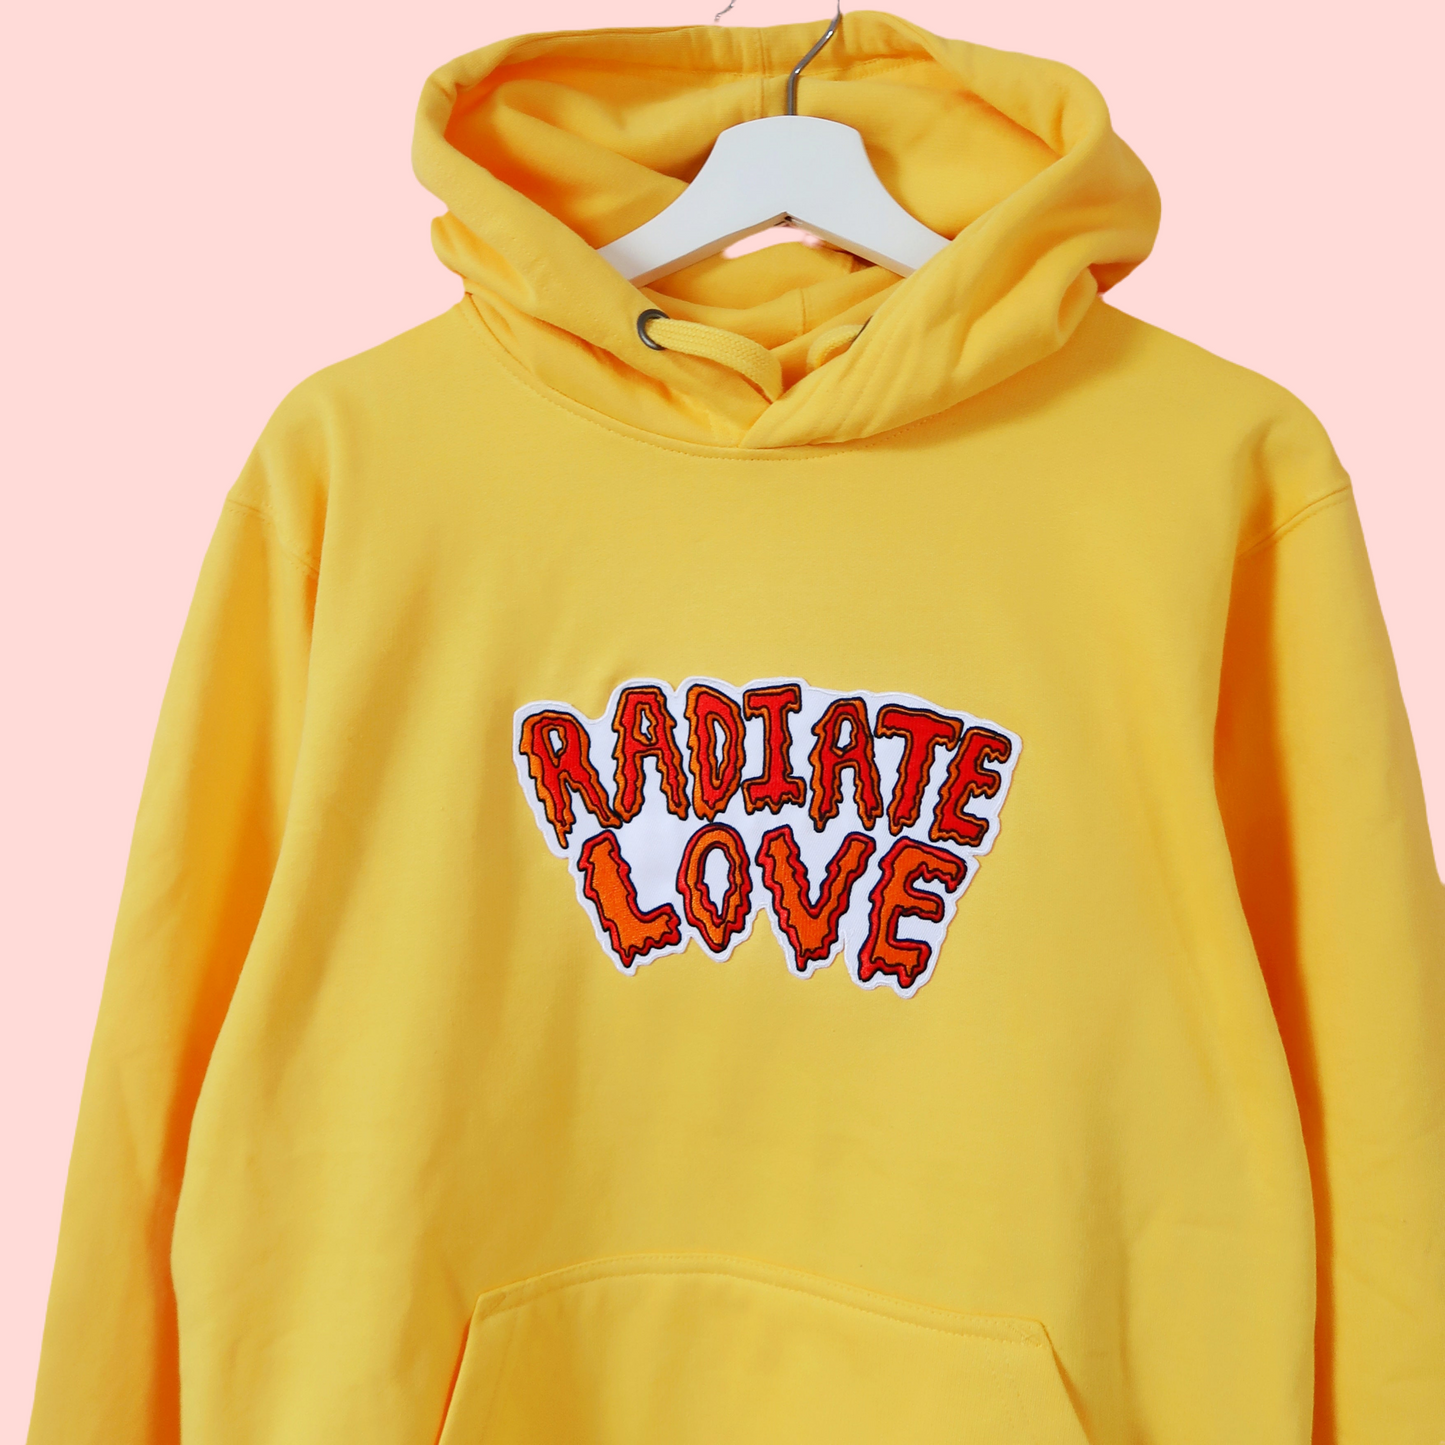 radiate love embroidered hoodie - yellow